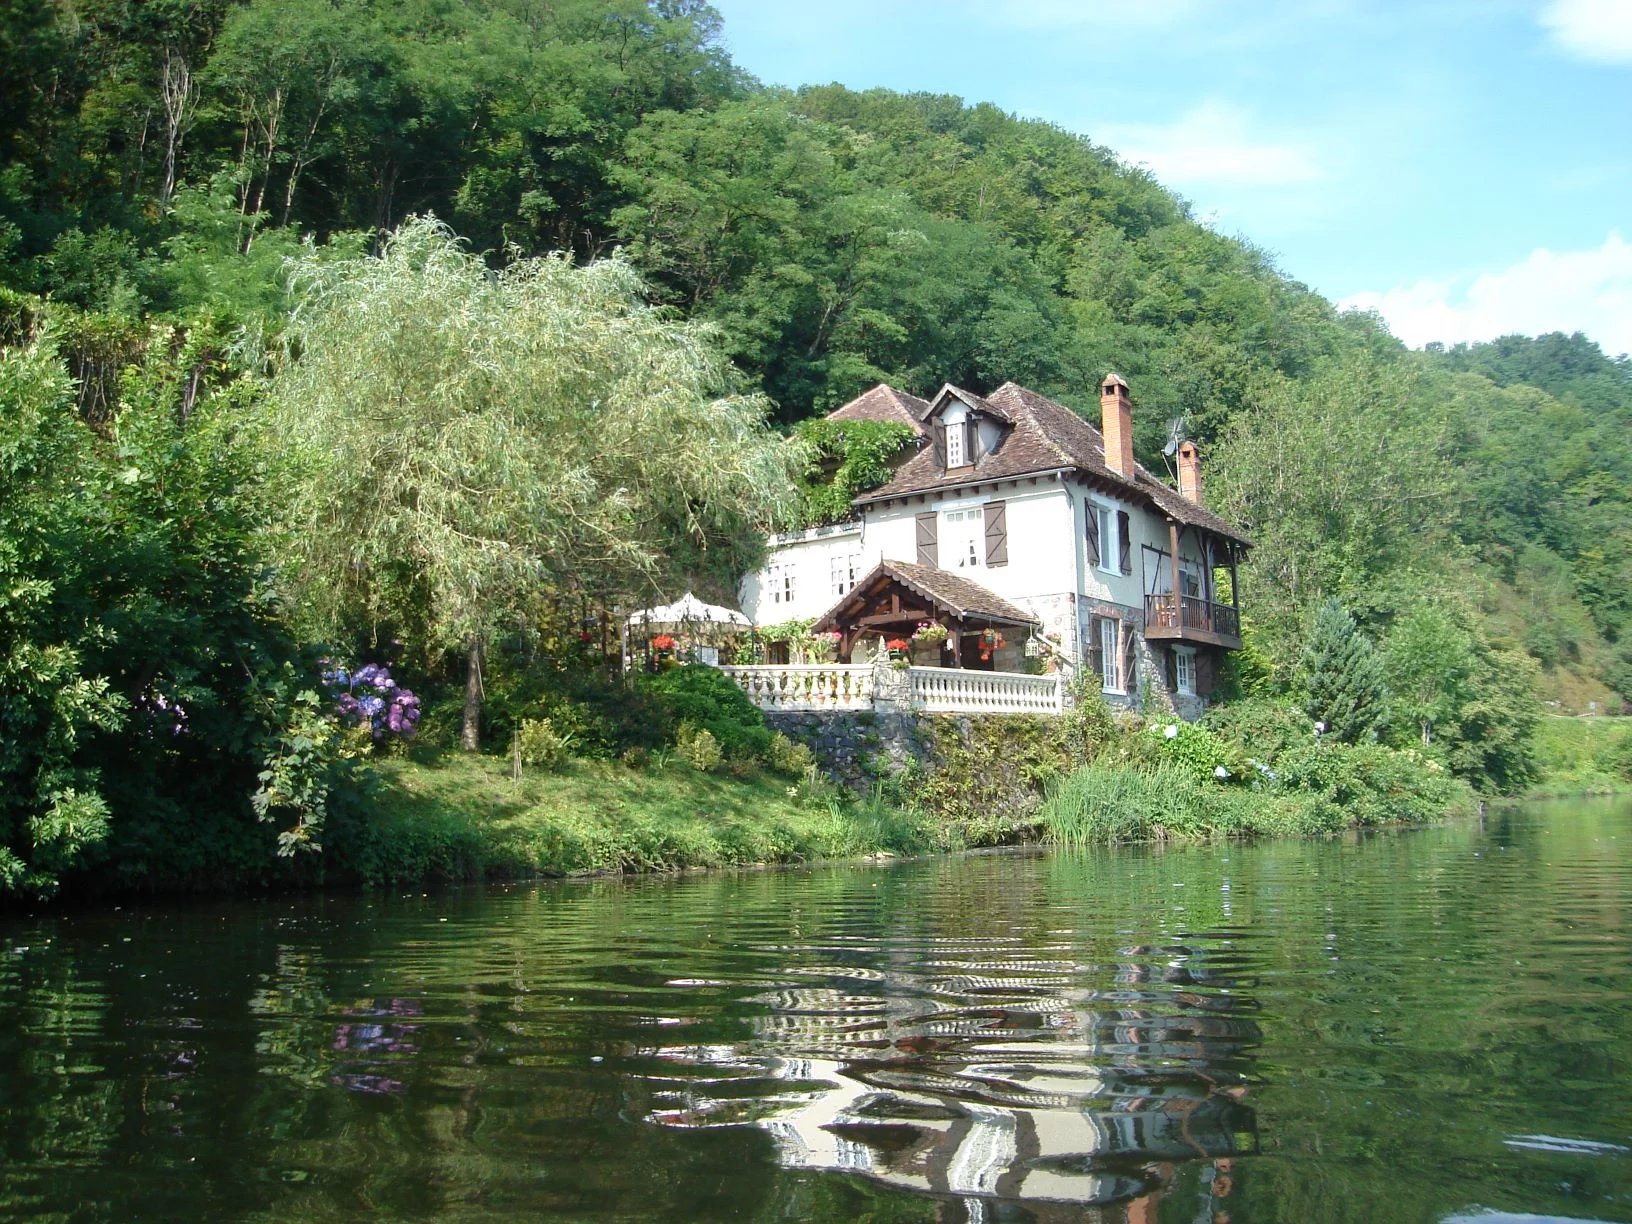 Fabulous river views on the edge of a beautiful medieval town